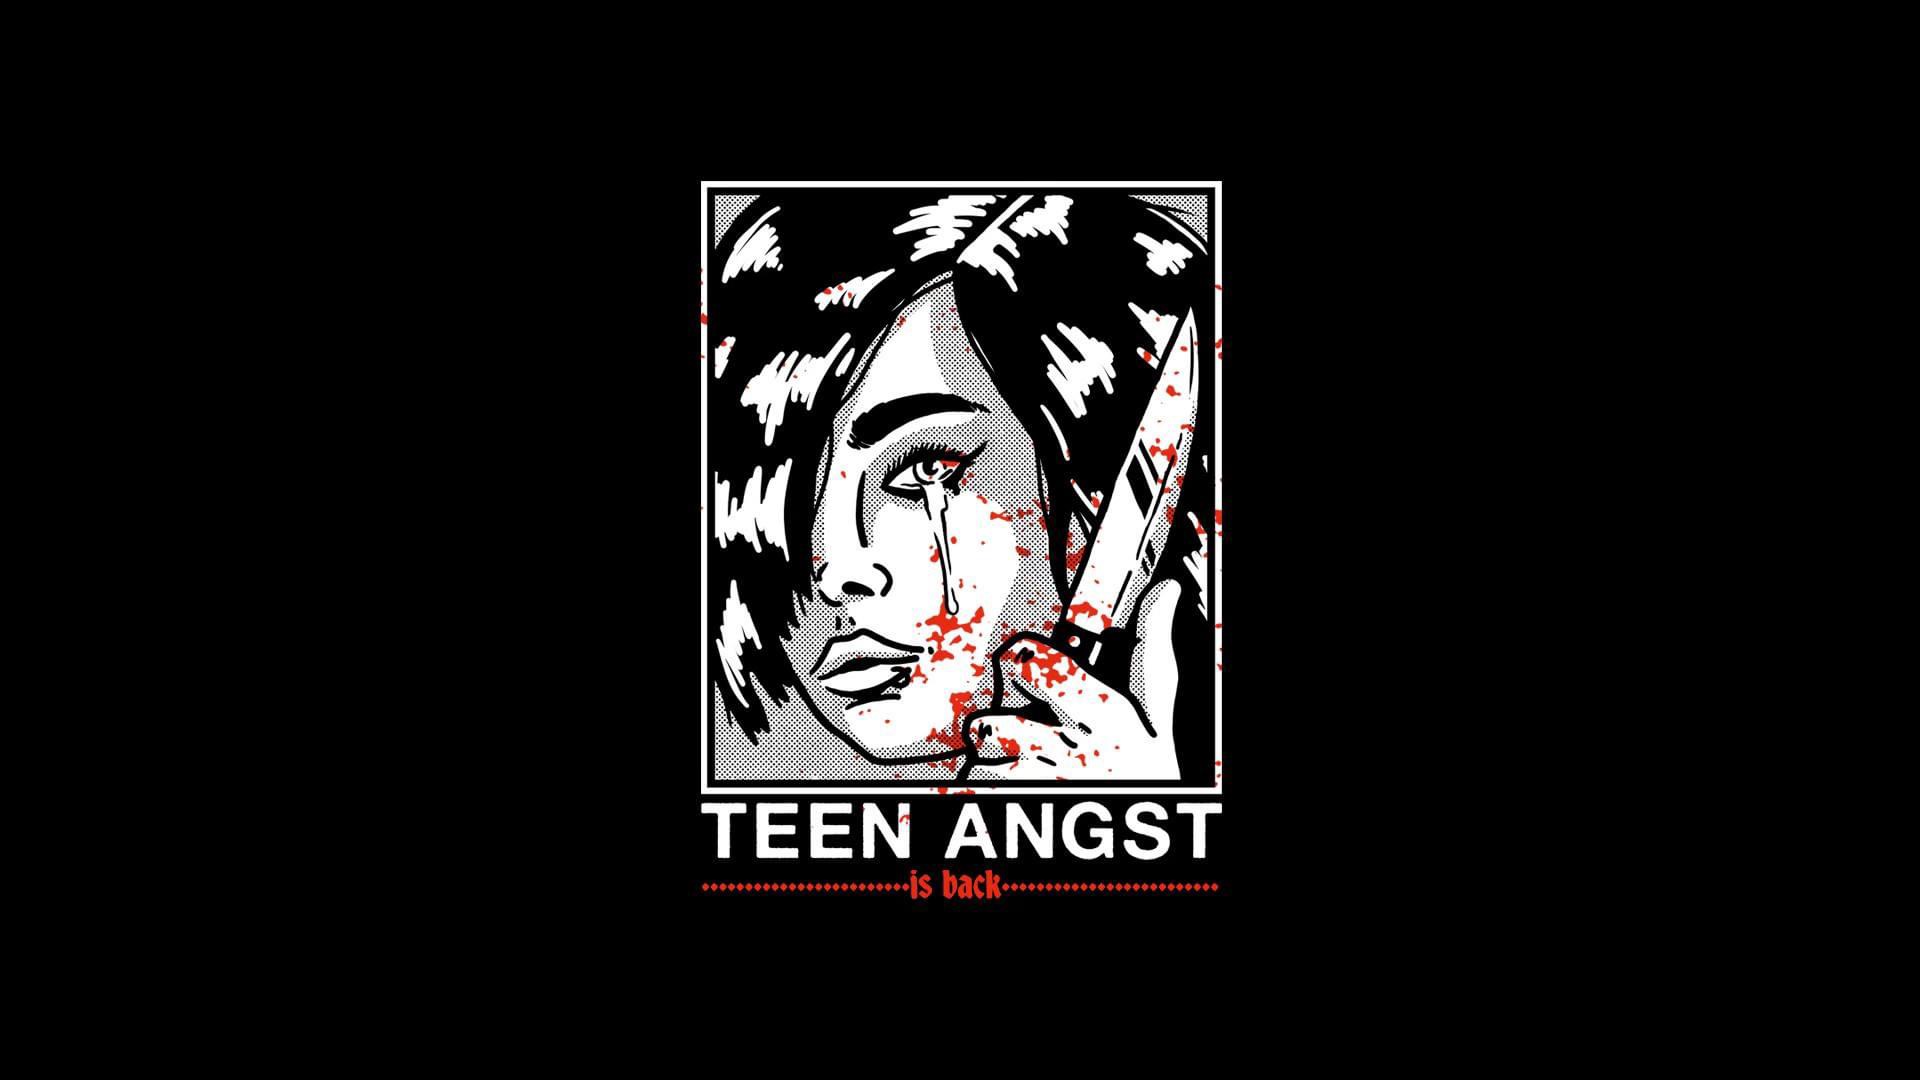 Teen Angst (Emo Party)